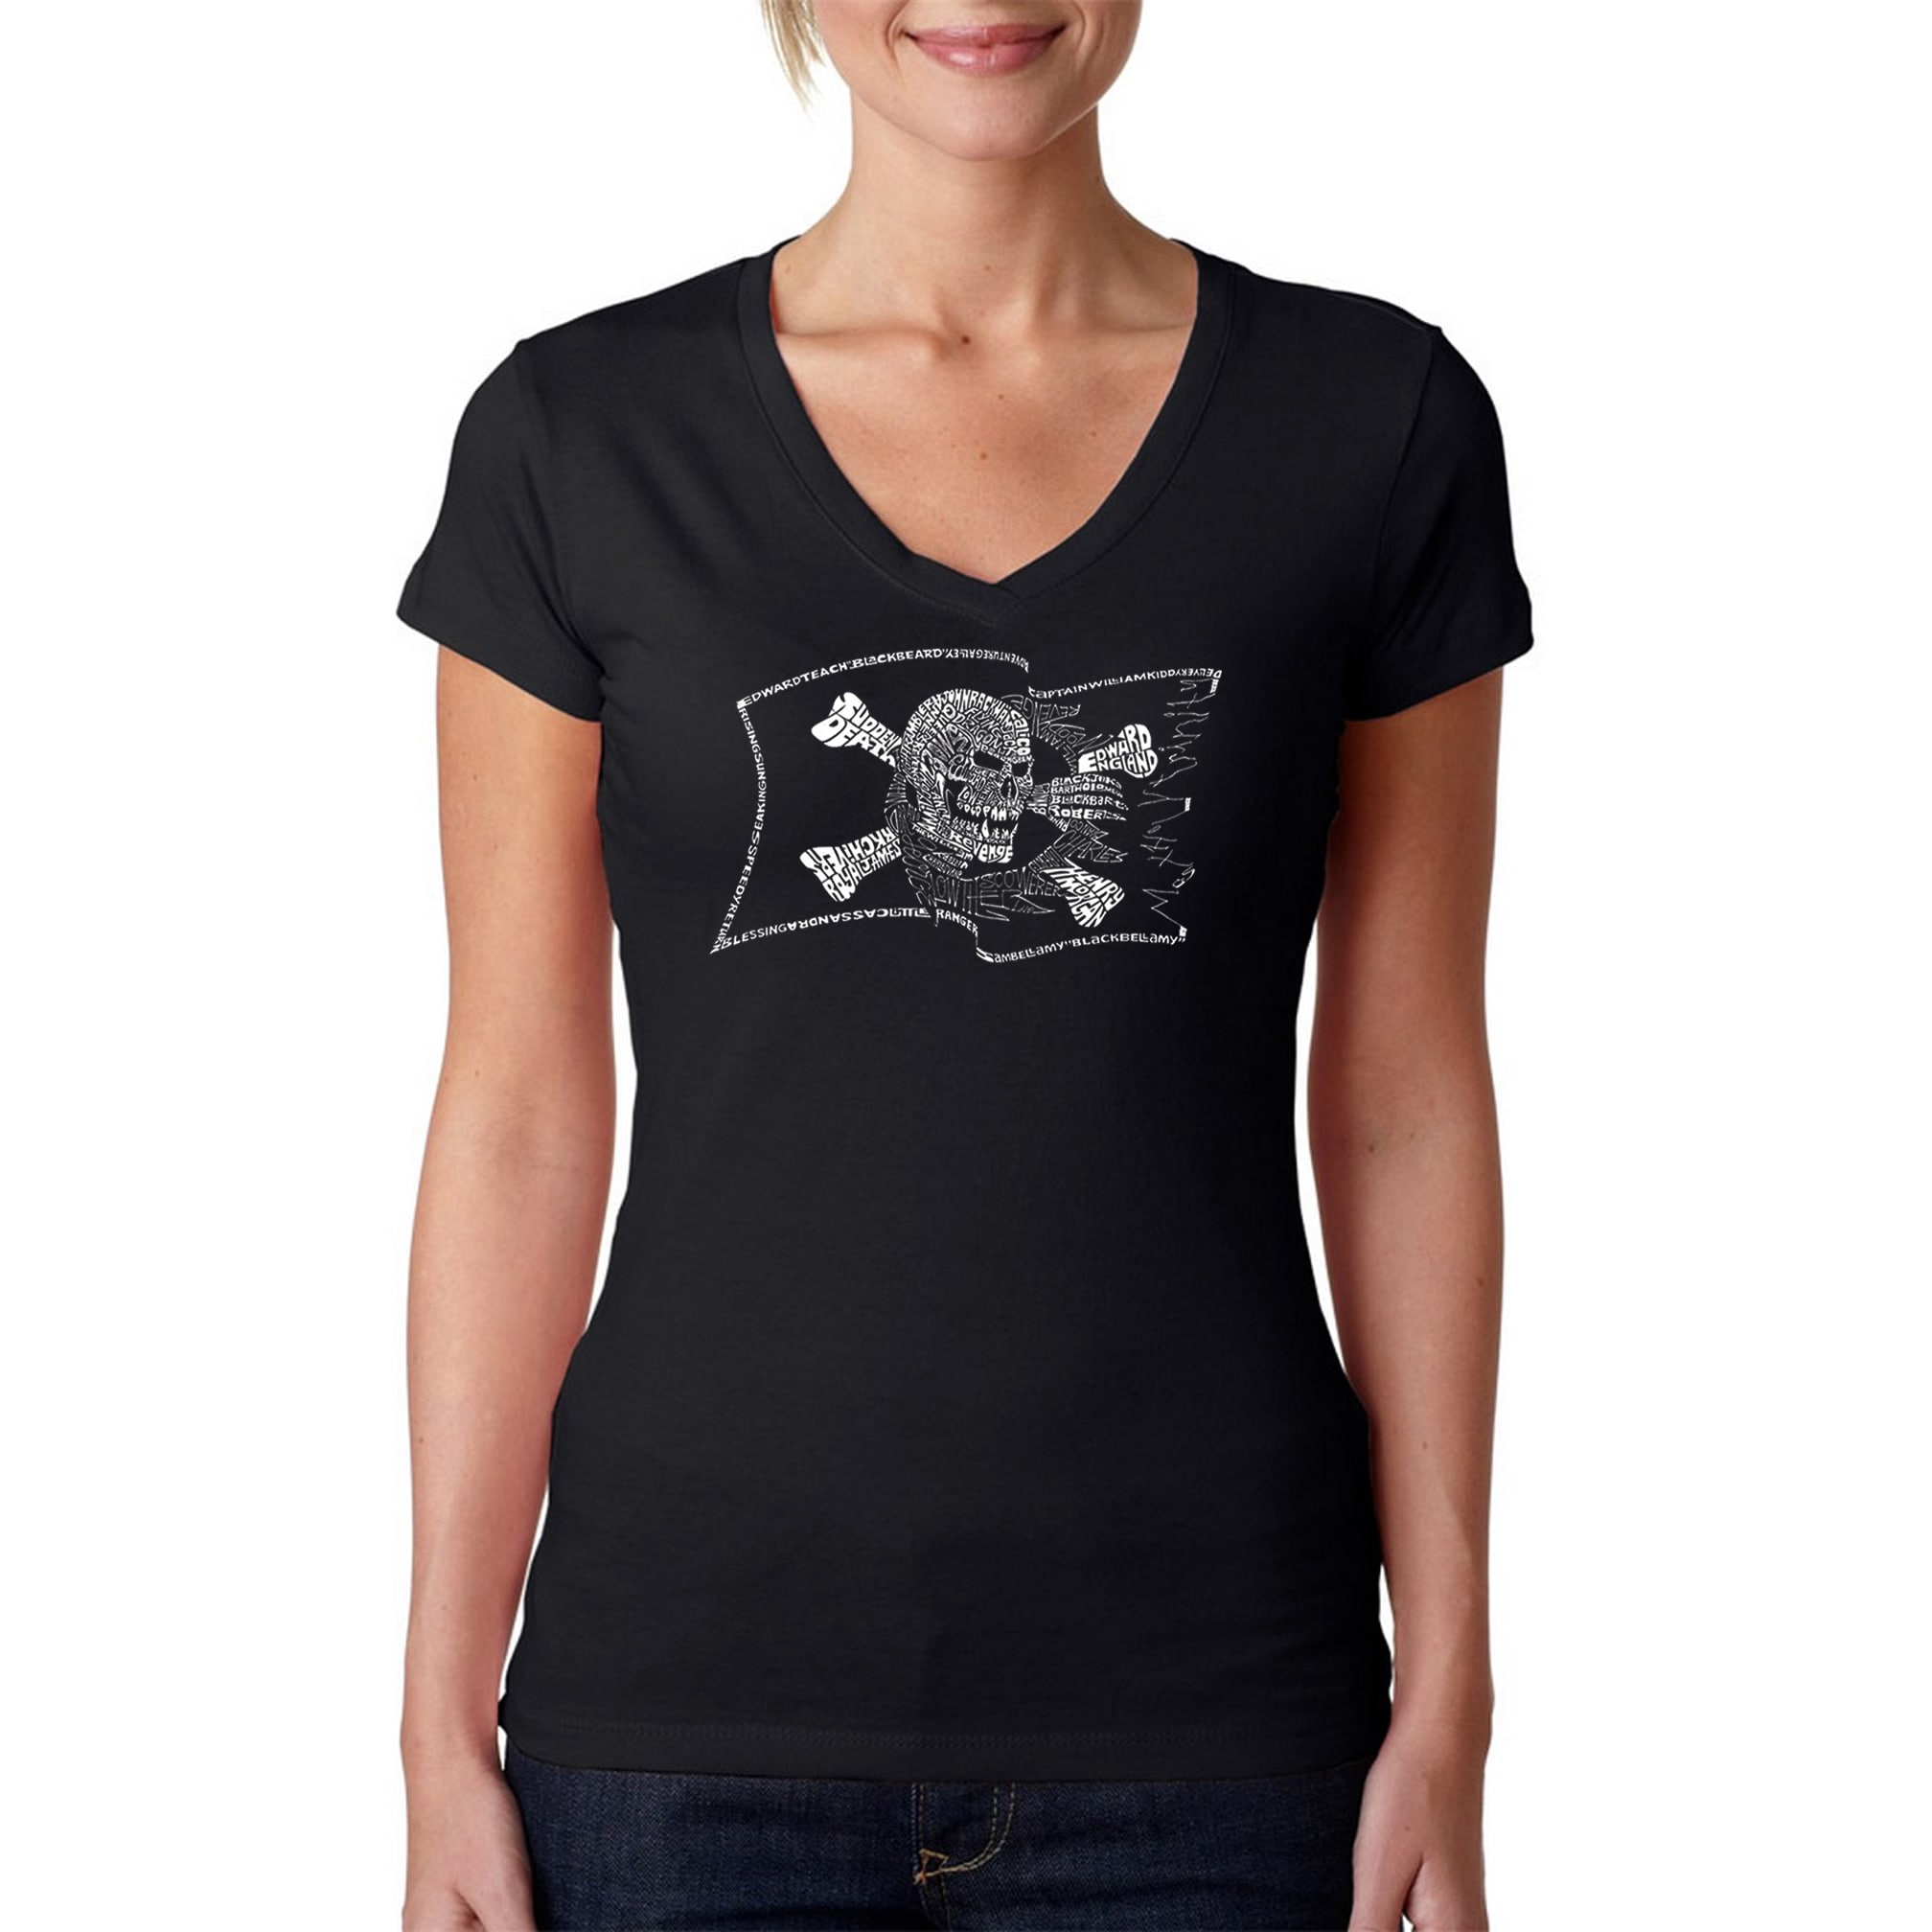 Los Angeles Pop Art Womens Pirate Flag Black V neck T shirt (100 percent cotton Machine washableAll measurements are approximate and may vary by size. )